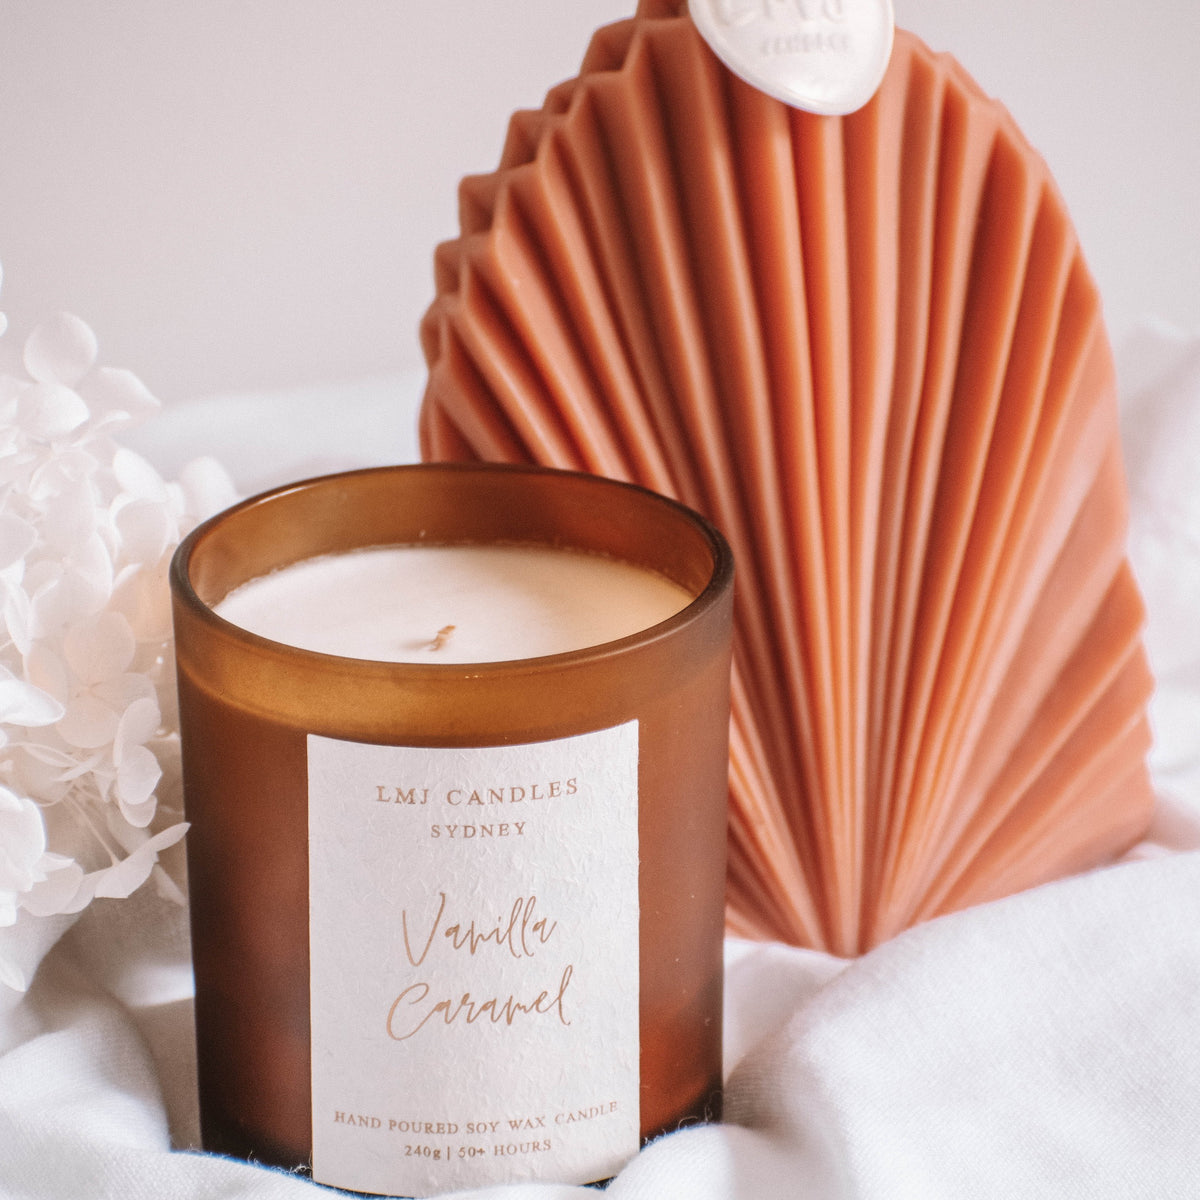 Shop our unique handmade soy wax candles with a variety of designs and scents, including pillar, sculptural, body, taper, animal, botanical, bubble, and personalized options. Available in various shapes and jars, they make the perfect handmade gift from LMJ Candles.